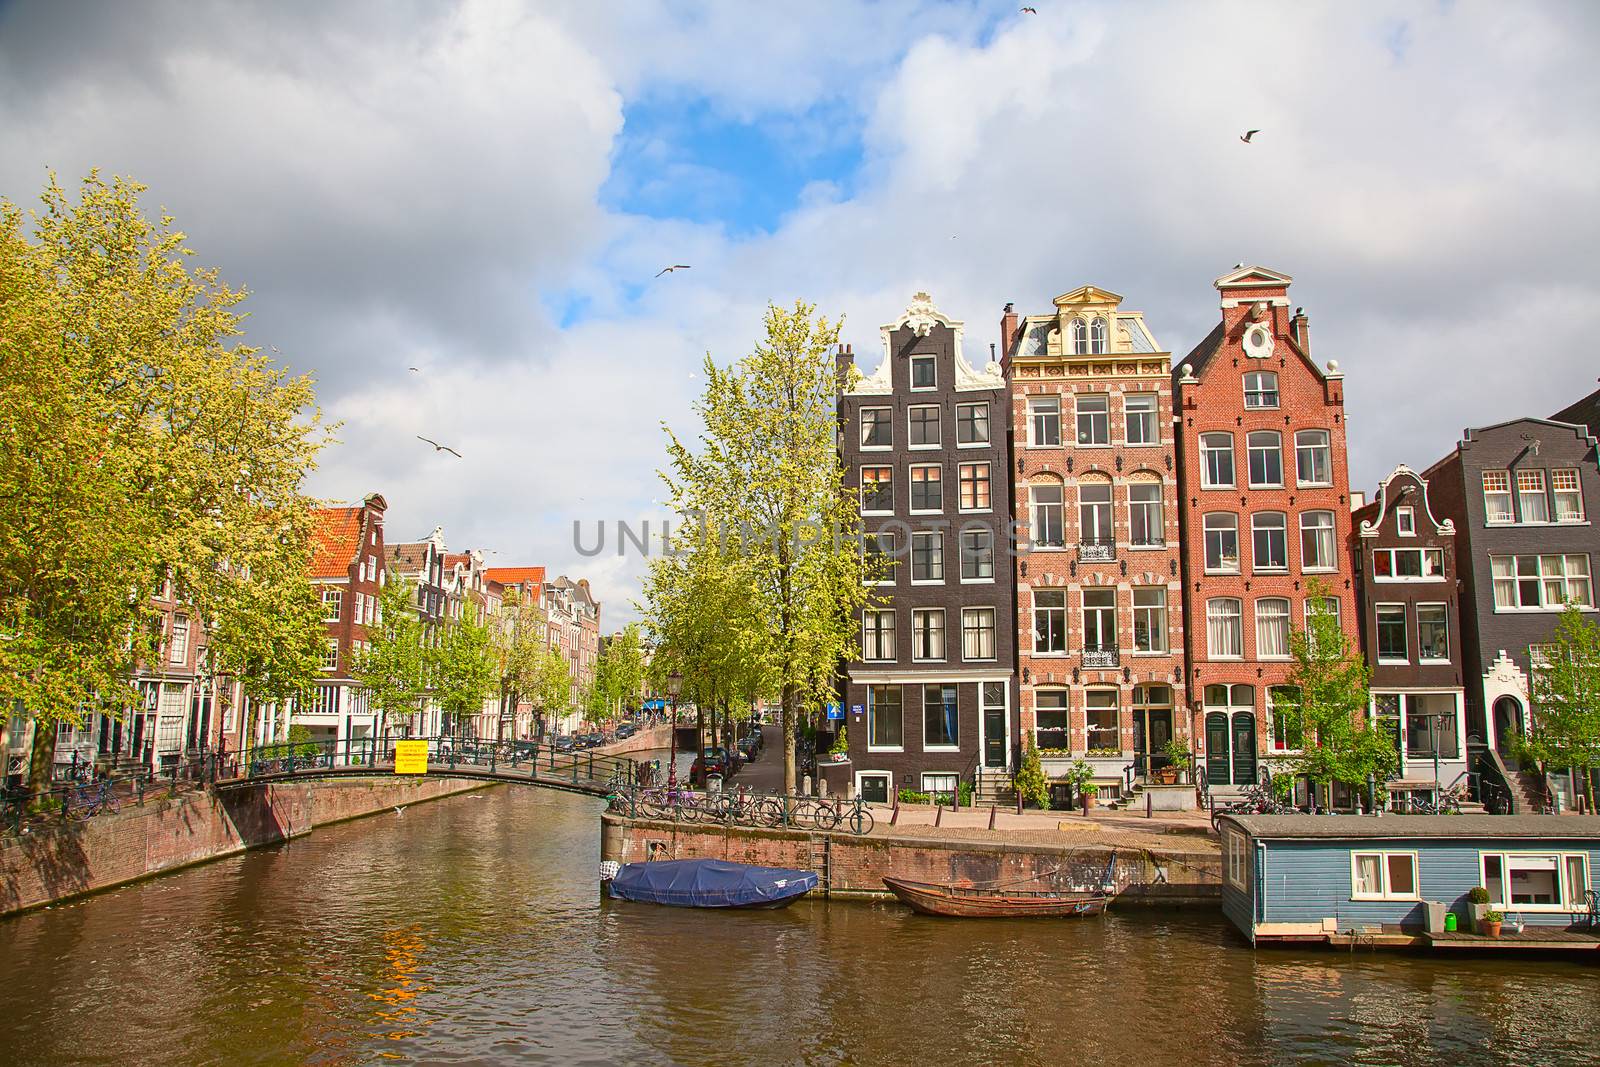 Traditional dutch houses in Amsterdam, Netherlands